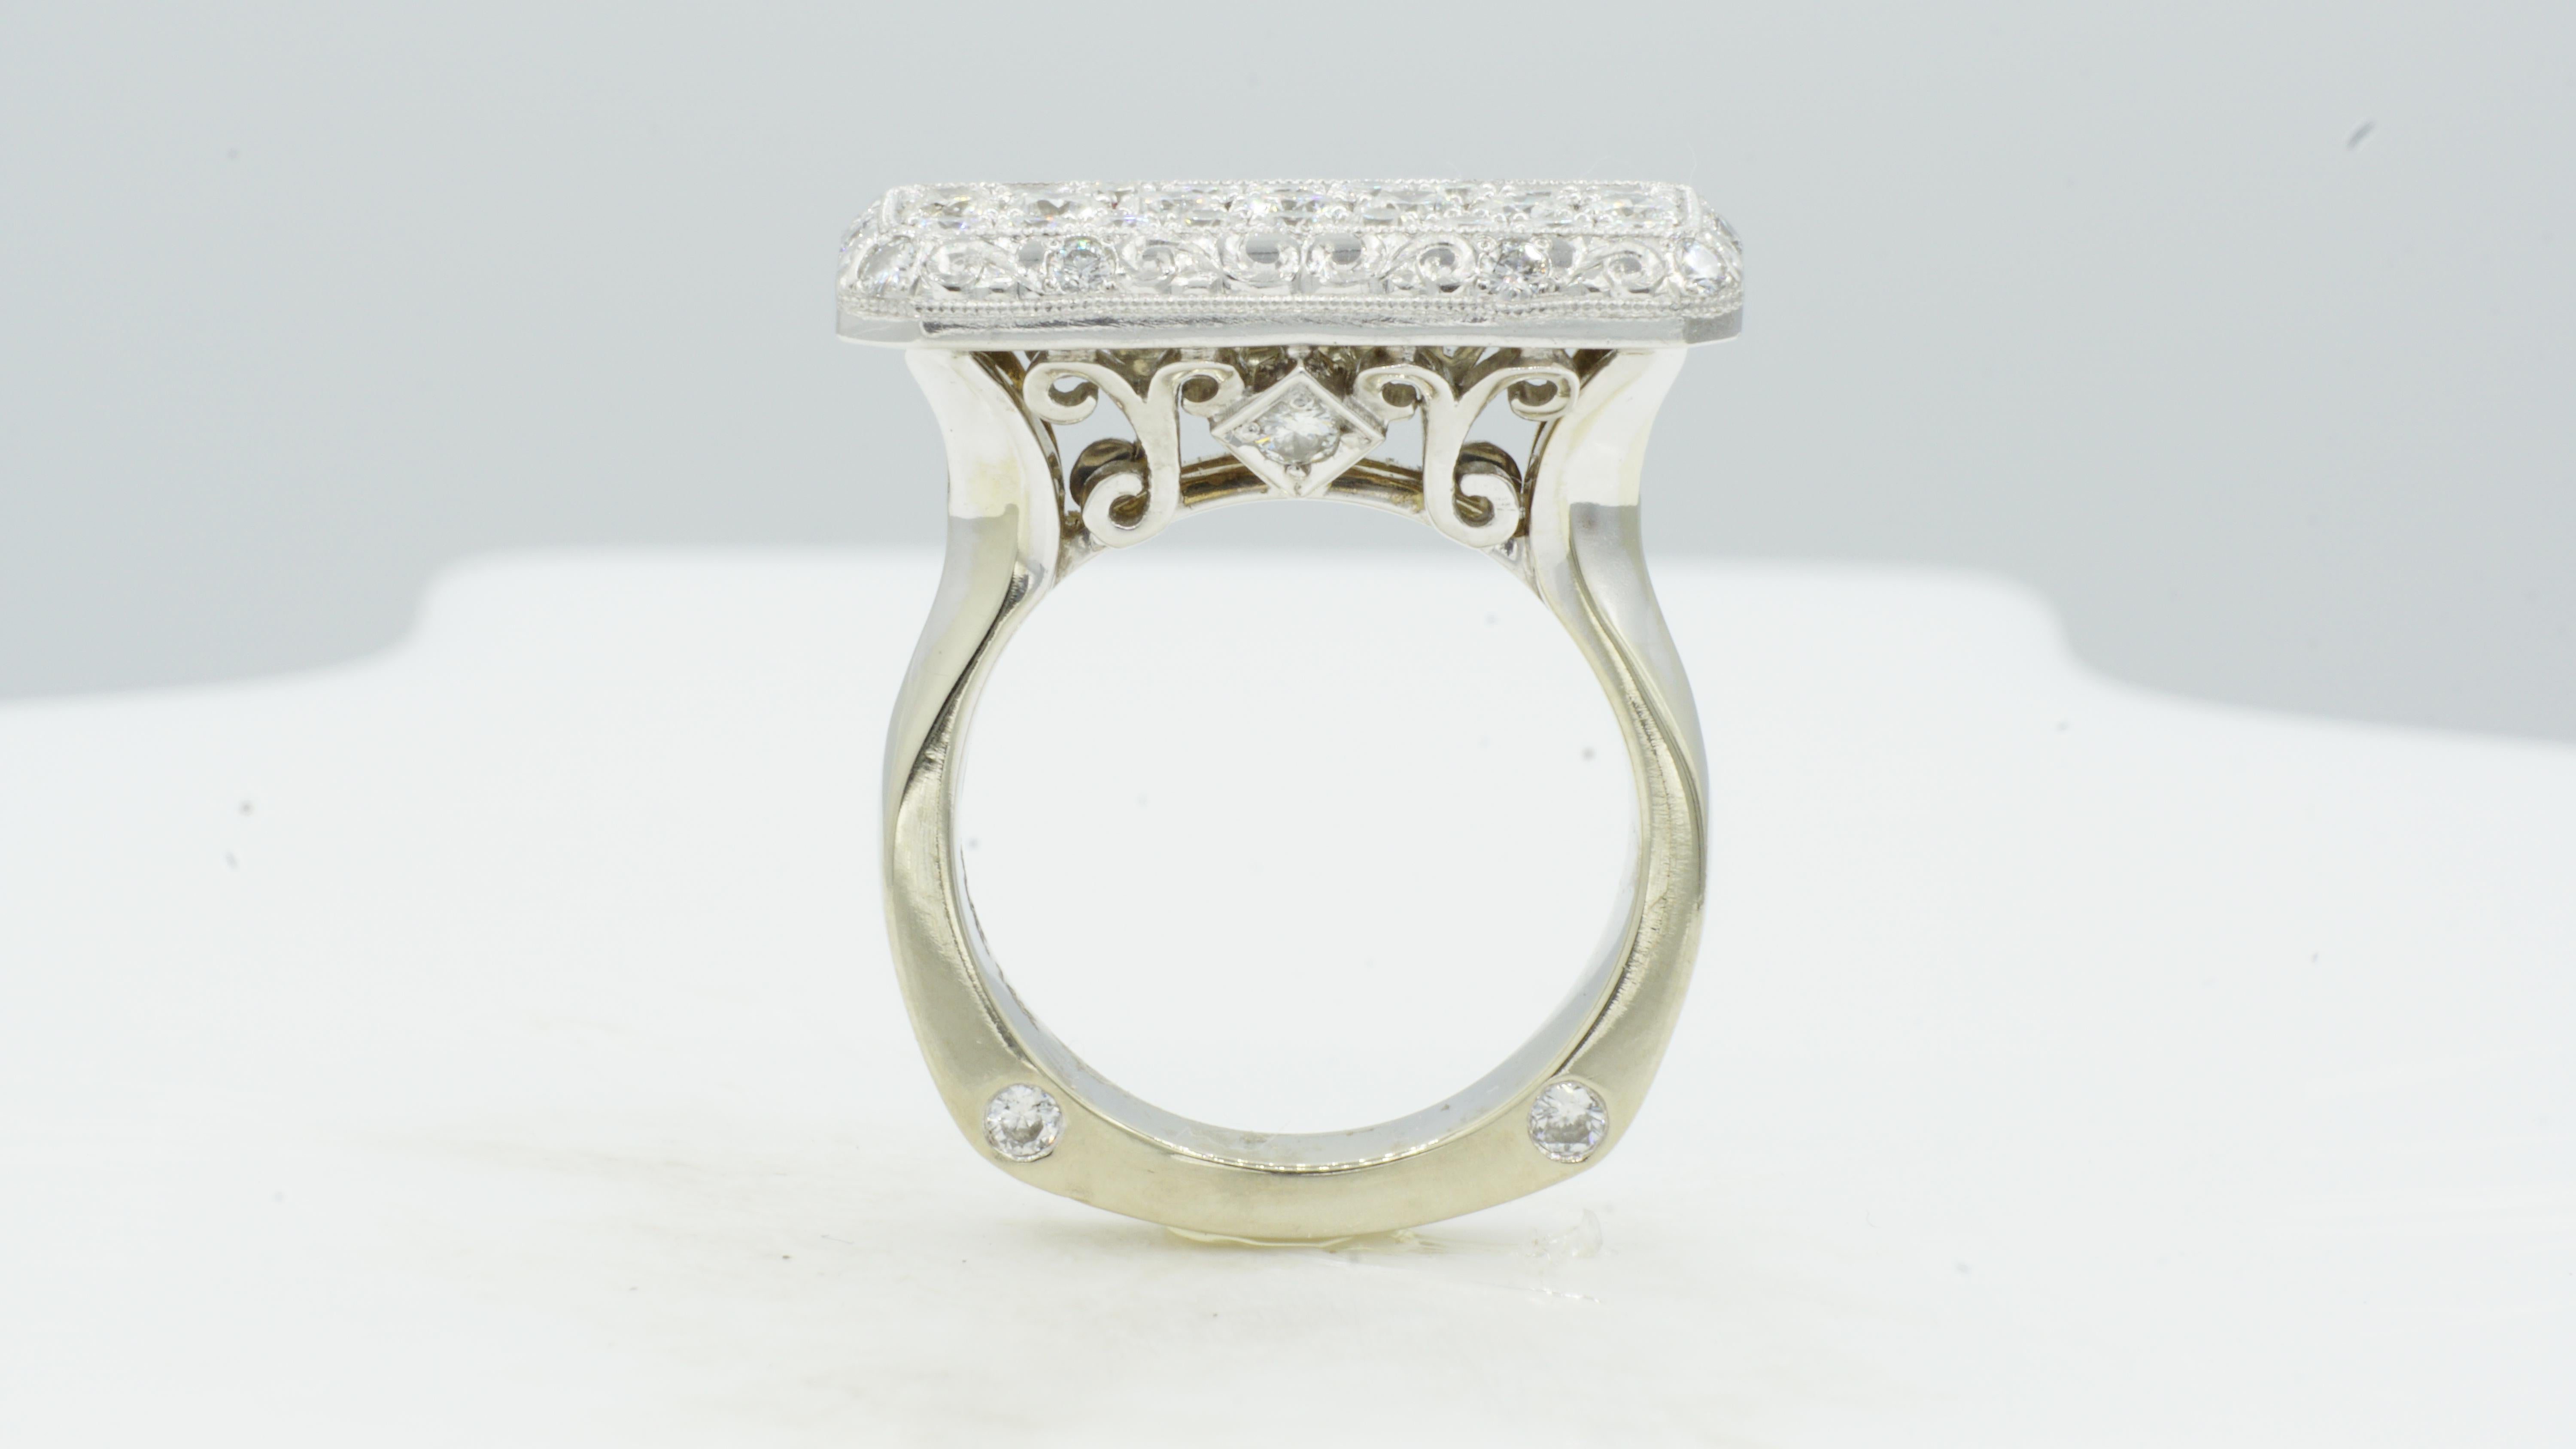 Platinum & 14kt White Gold Diamond 1.23cttw Ring by Rock N Gold Creations. High quality pre-owned statement ring in excellent condition designed by Rock N Gold Creations. The top of the ring is platinum with three rows of bead set round brilliant